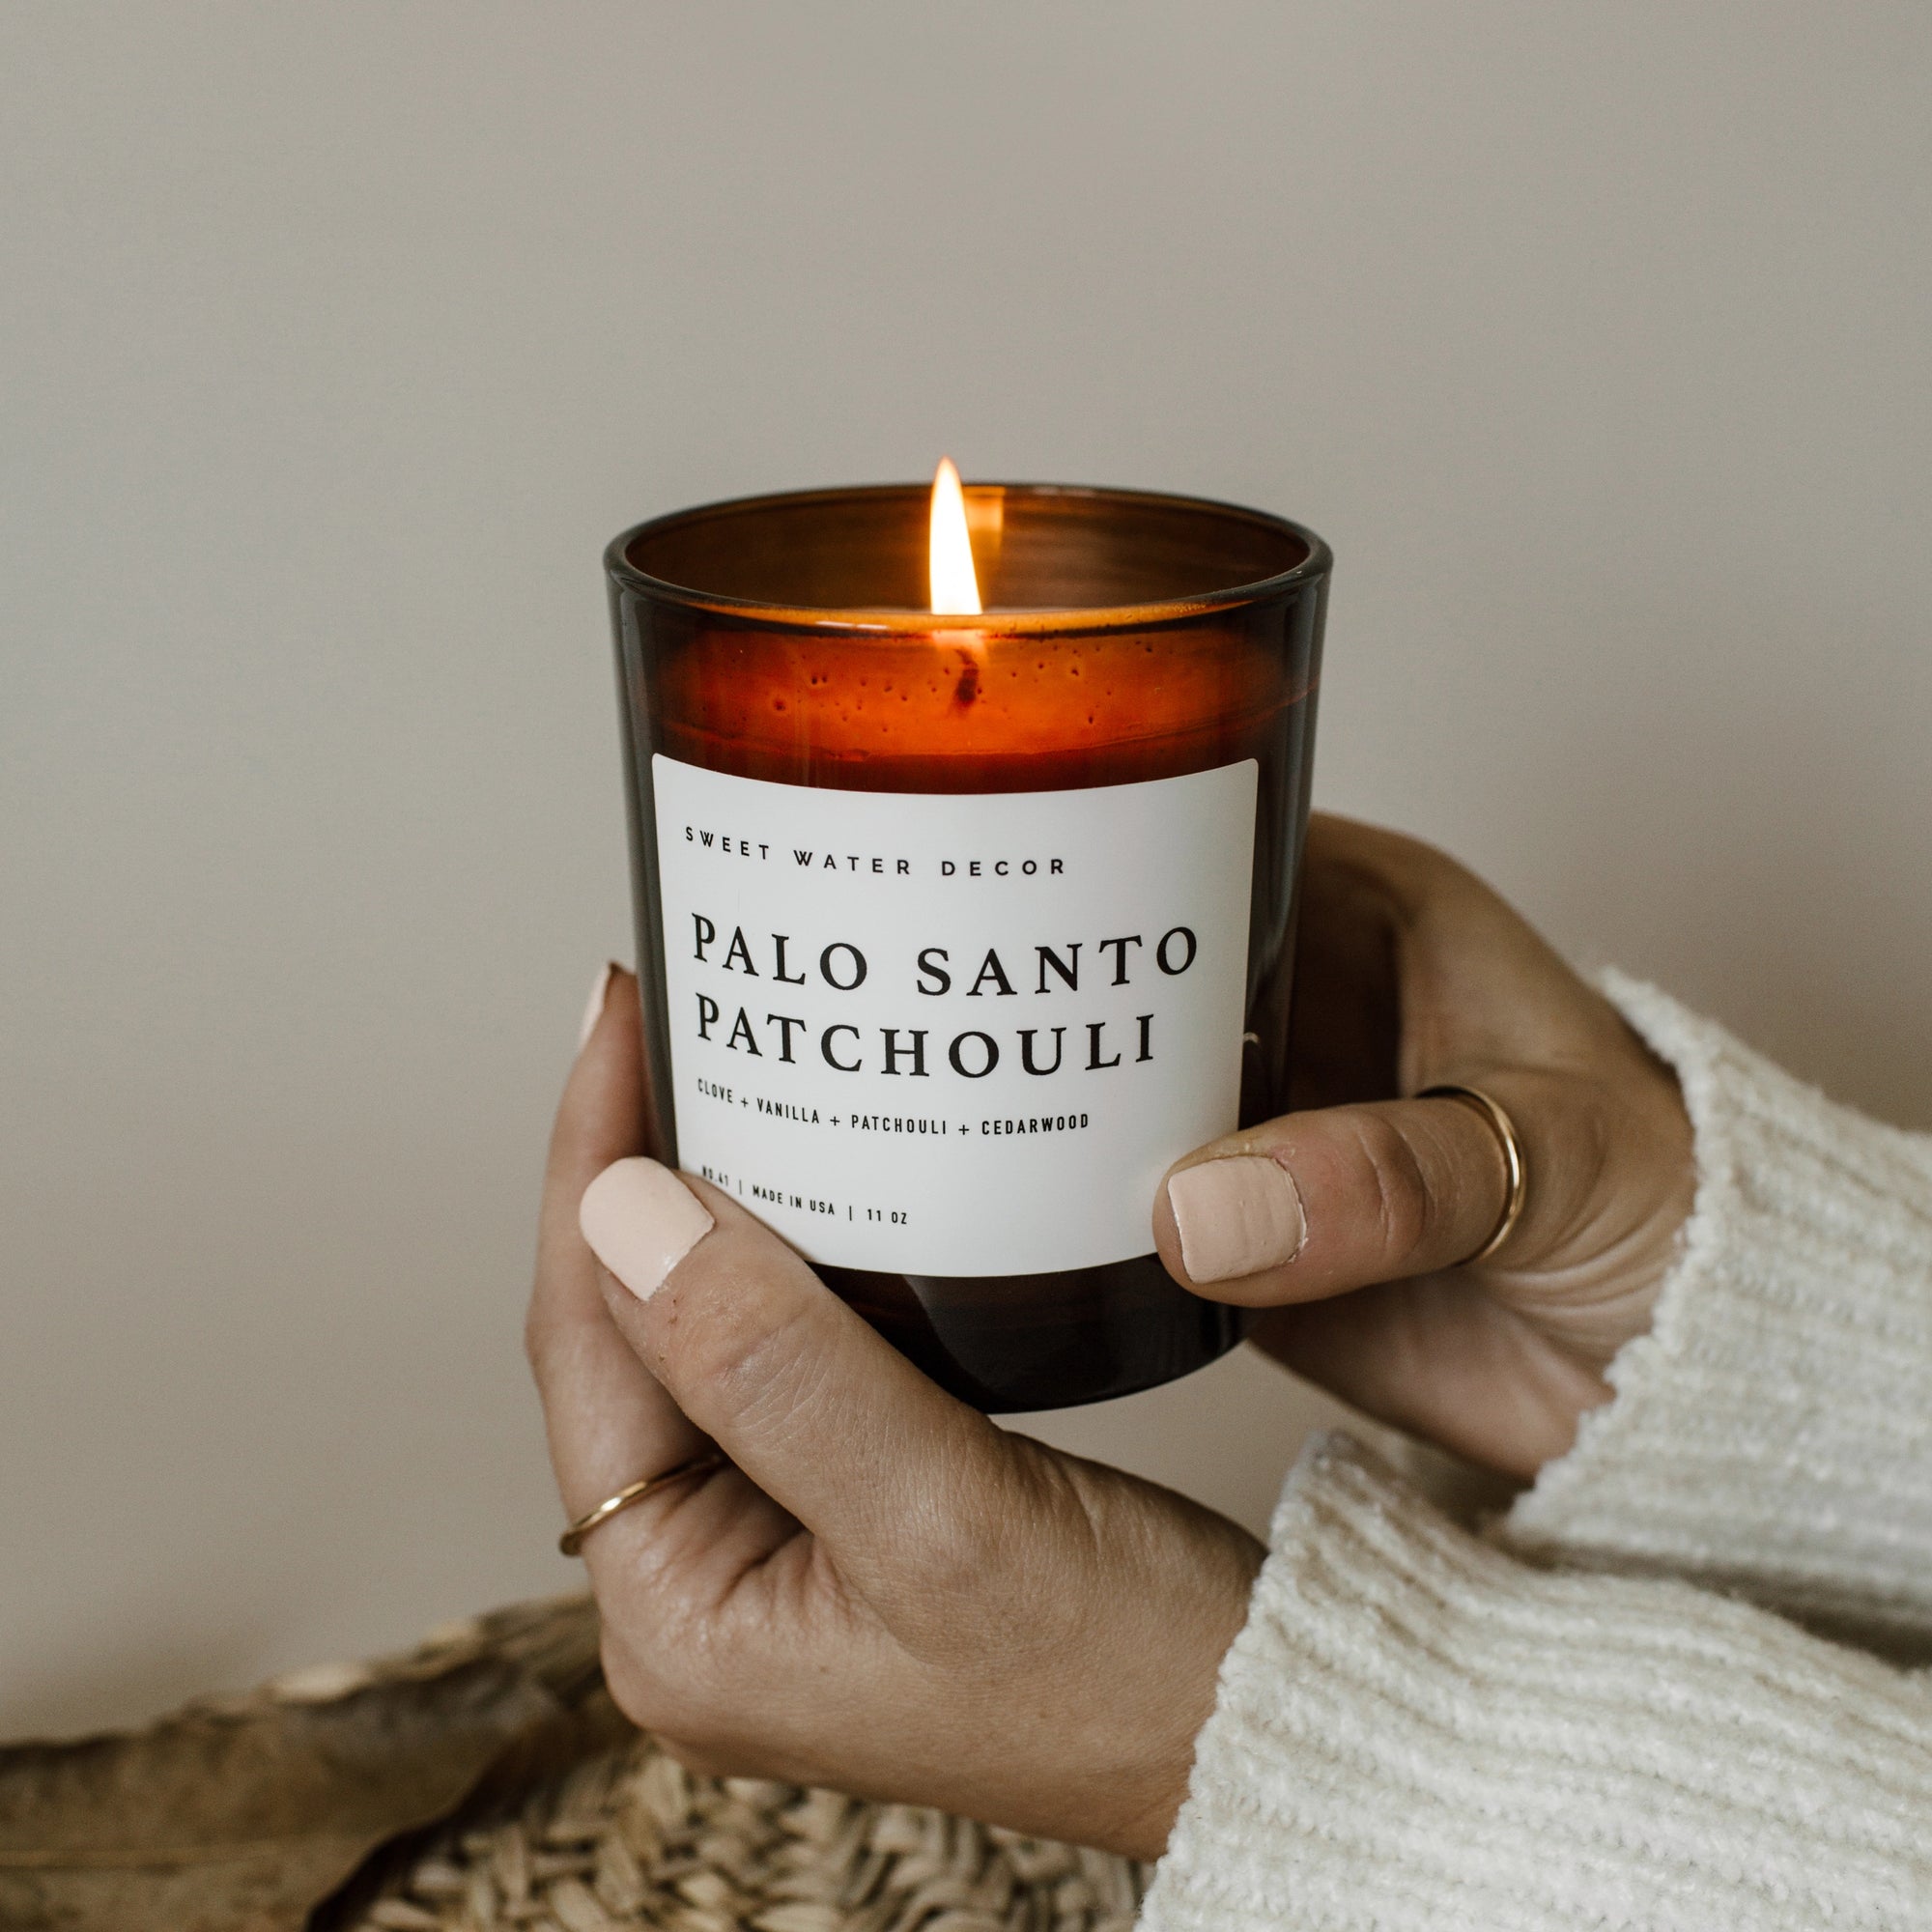 Palo santo patchouli soy candle in amber jar, lit and held up in two hands.